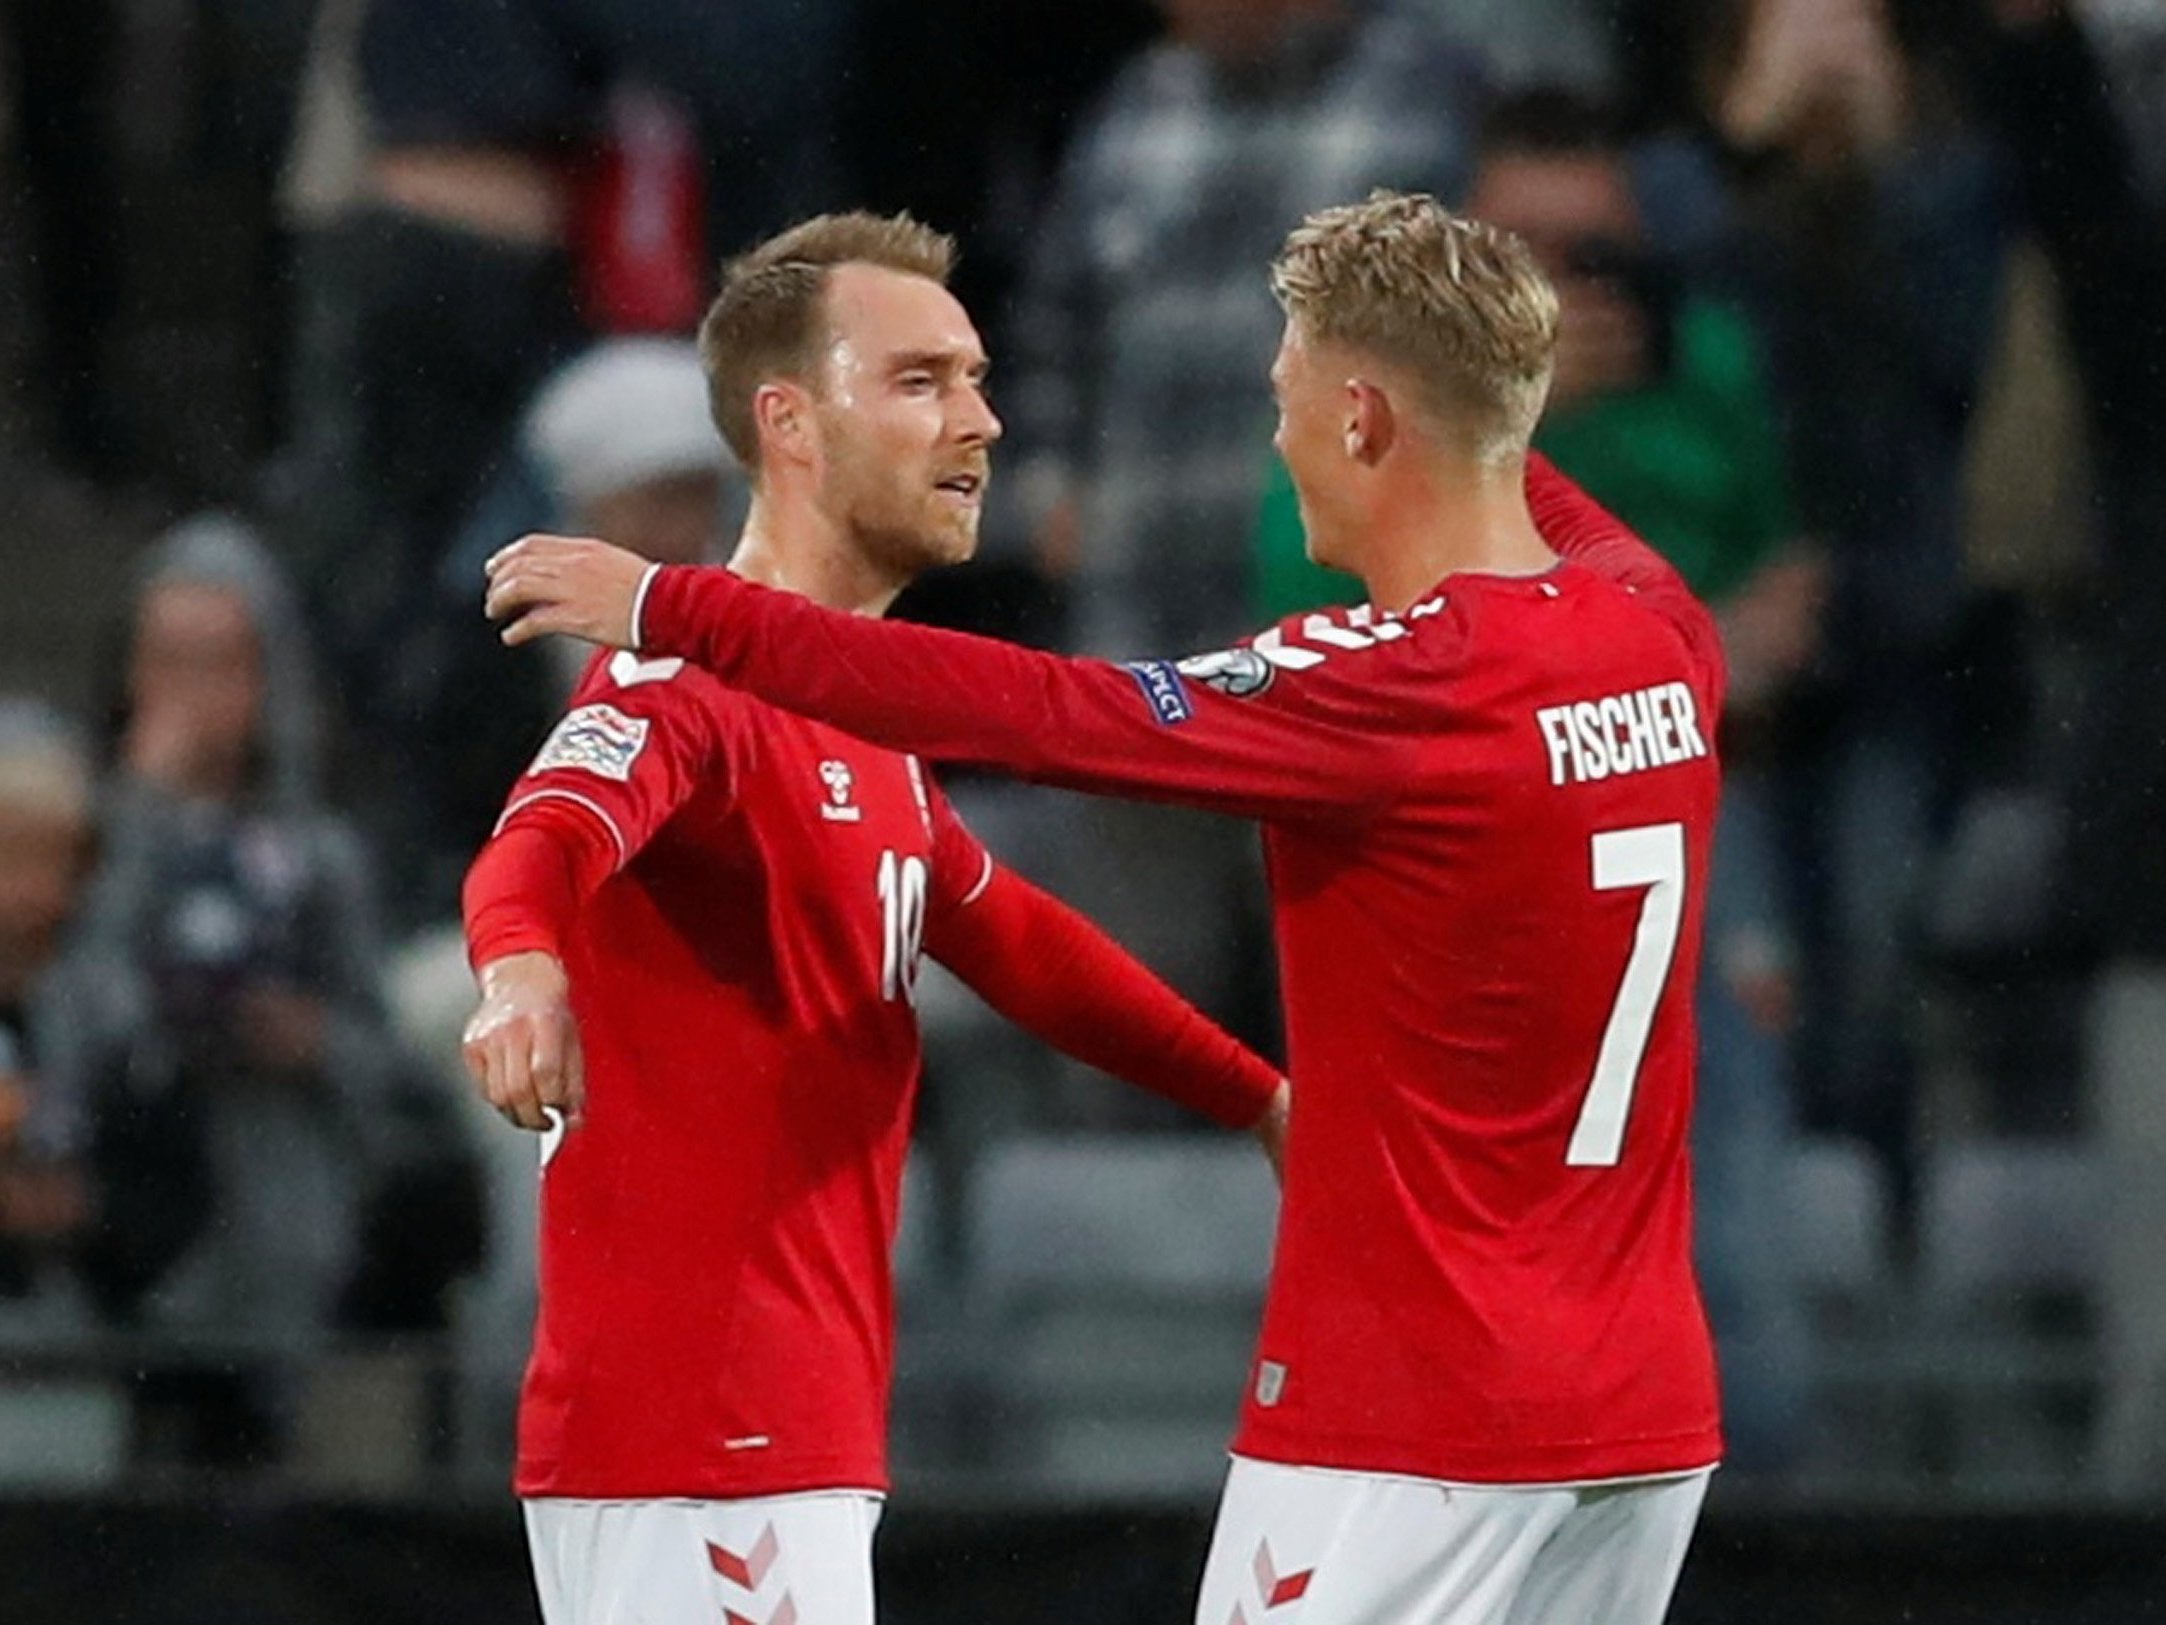 Denmark are likely to be without Christian Eriksen due to injury